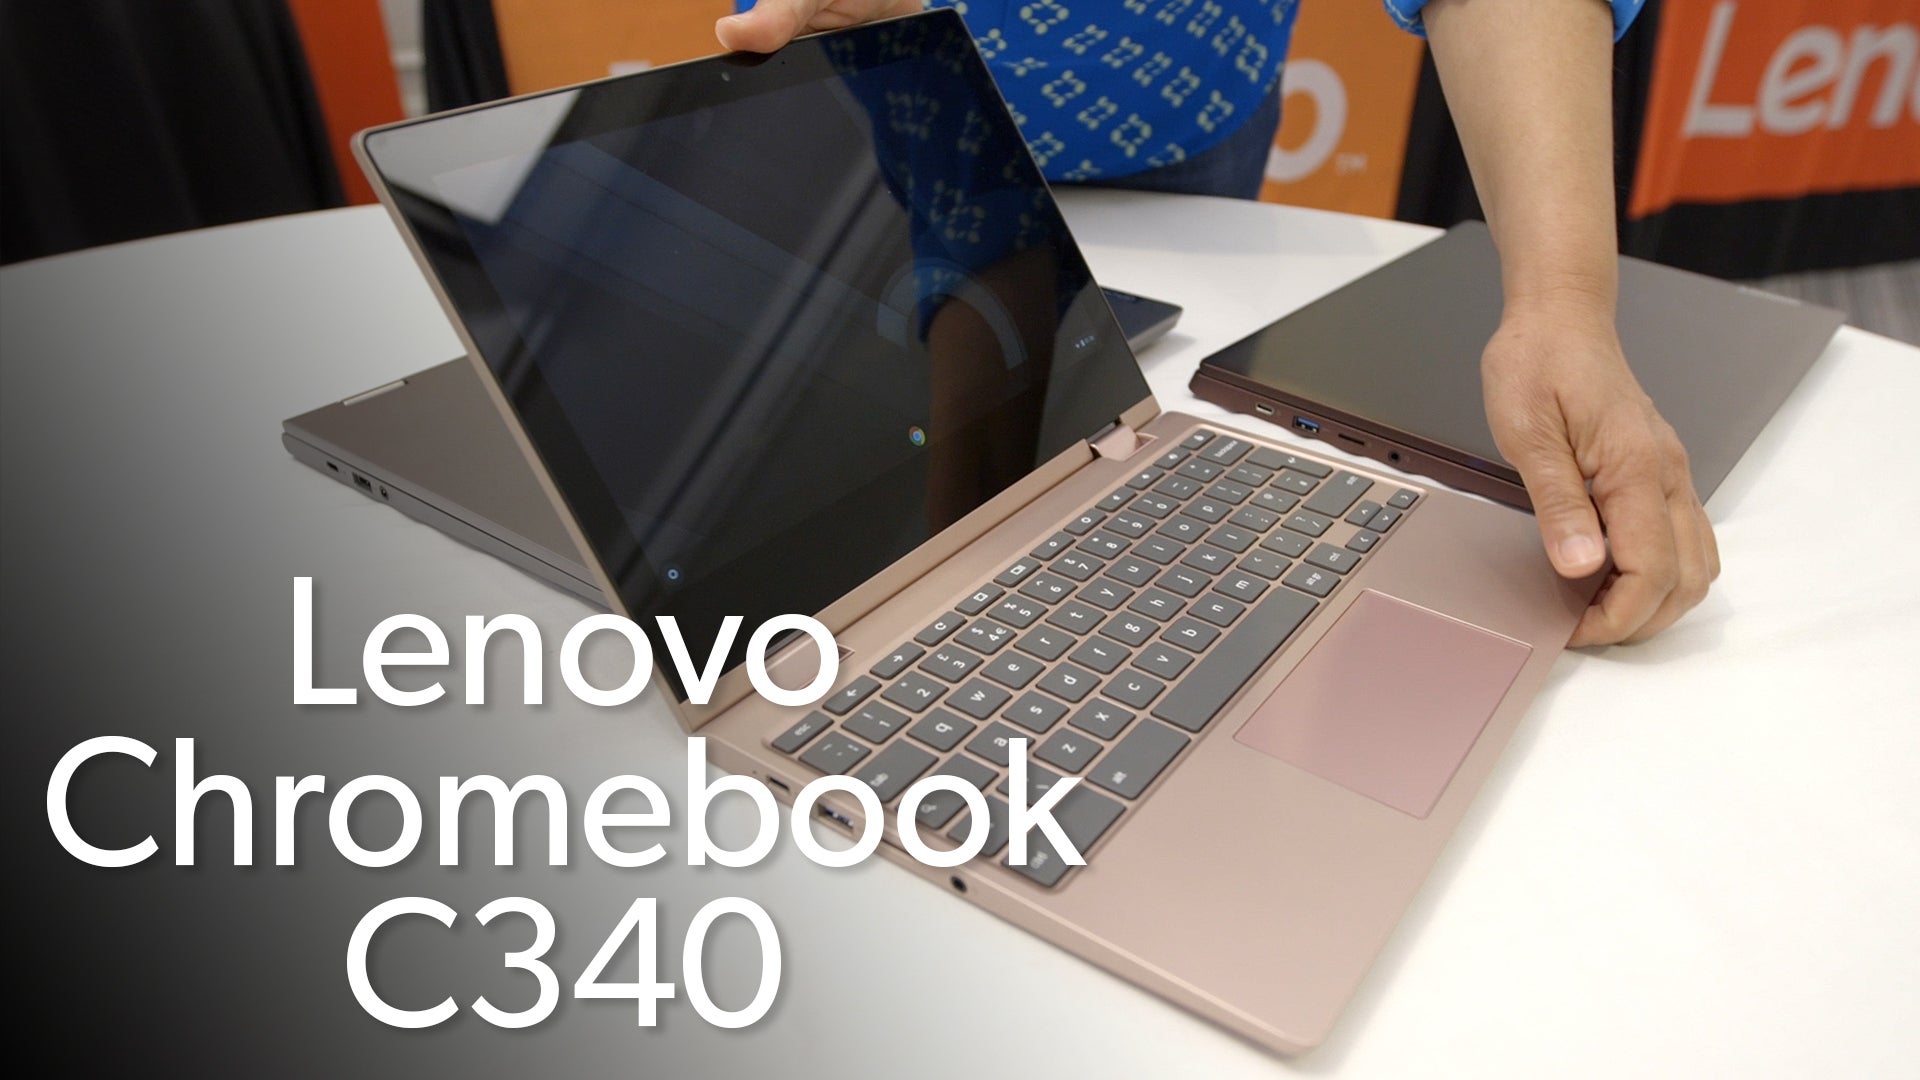 Lenovo C340 And S340 Chromebooks Bring Some Colorful Flair Pcworld - how to play roblox on chromebook in 2020 beebom